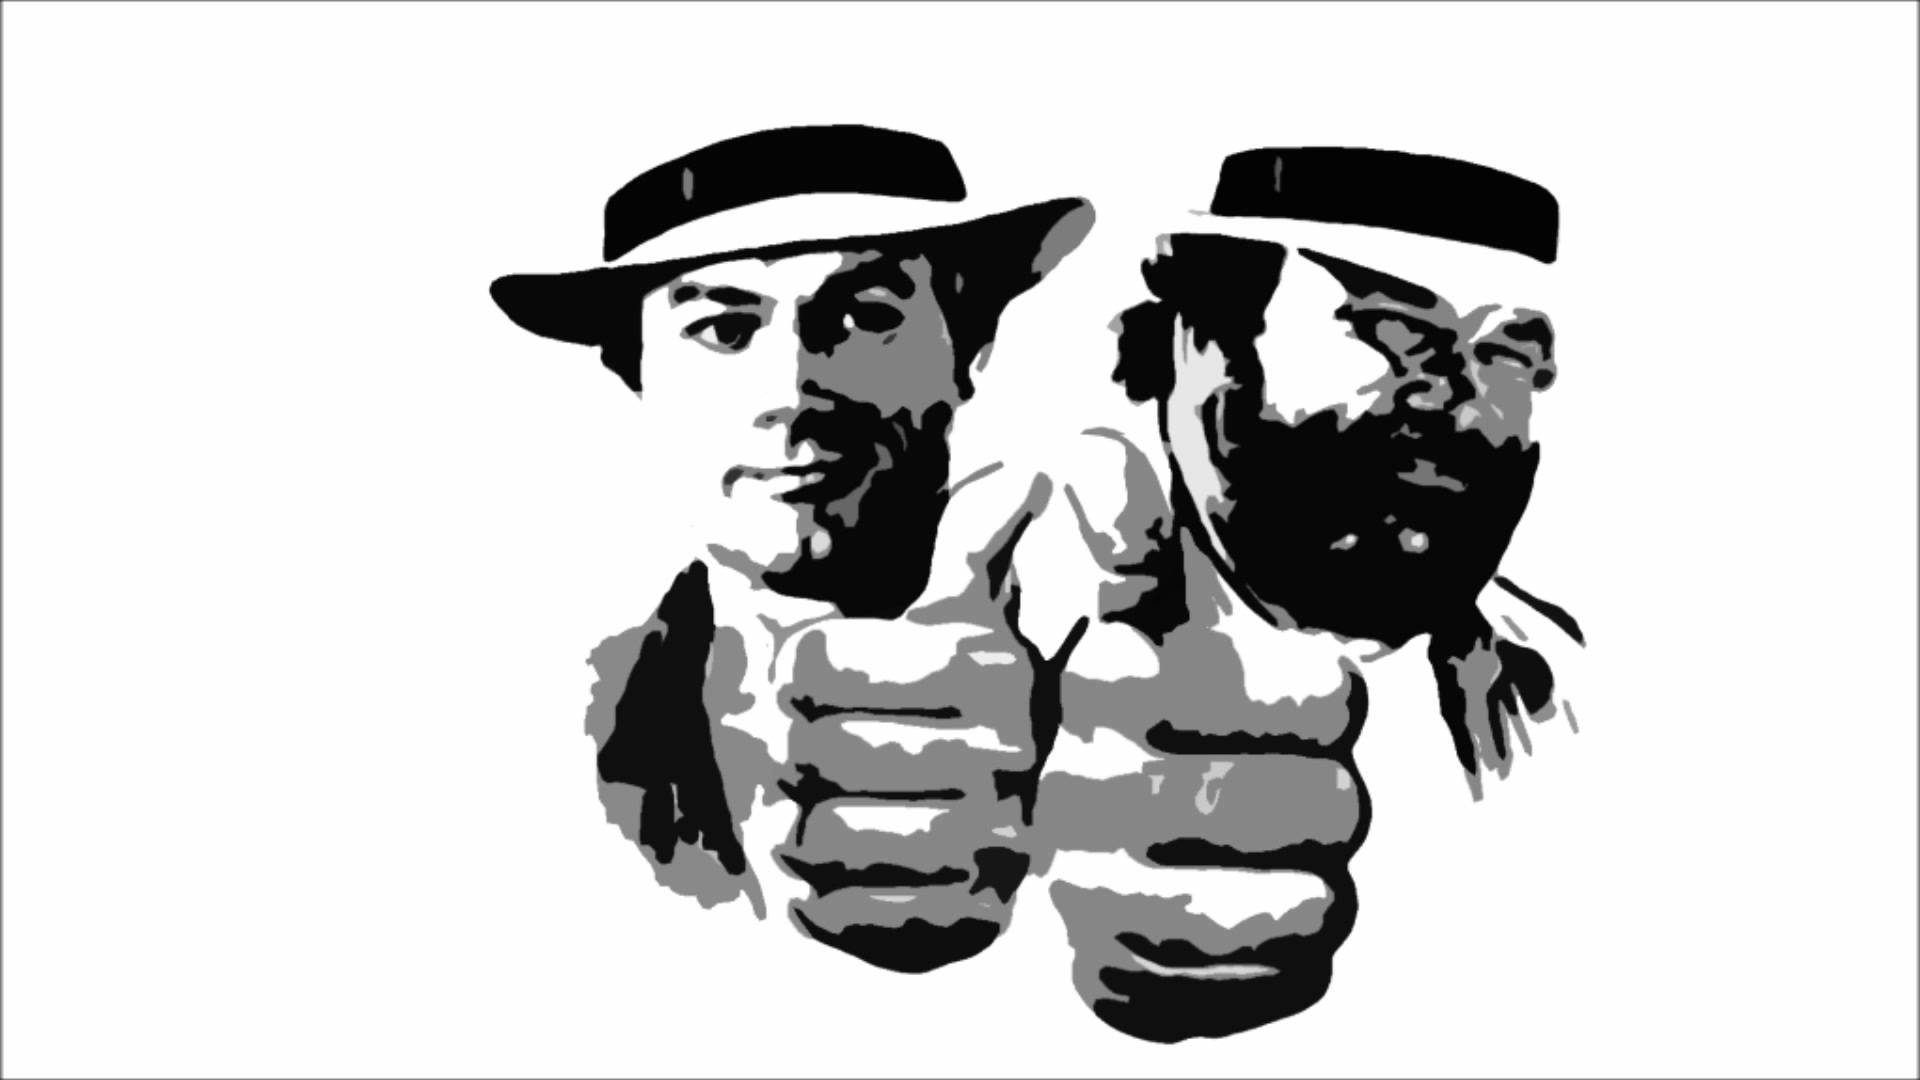 1920x1080px Bud Spencer Und Terence Hill 70.82 KB